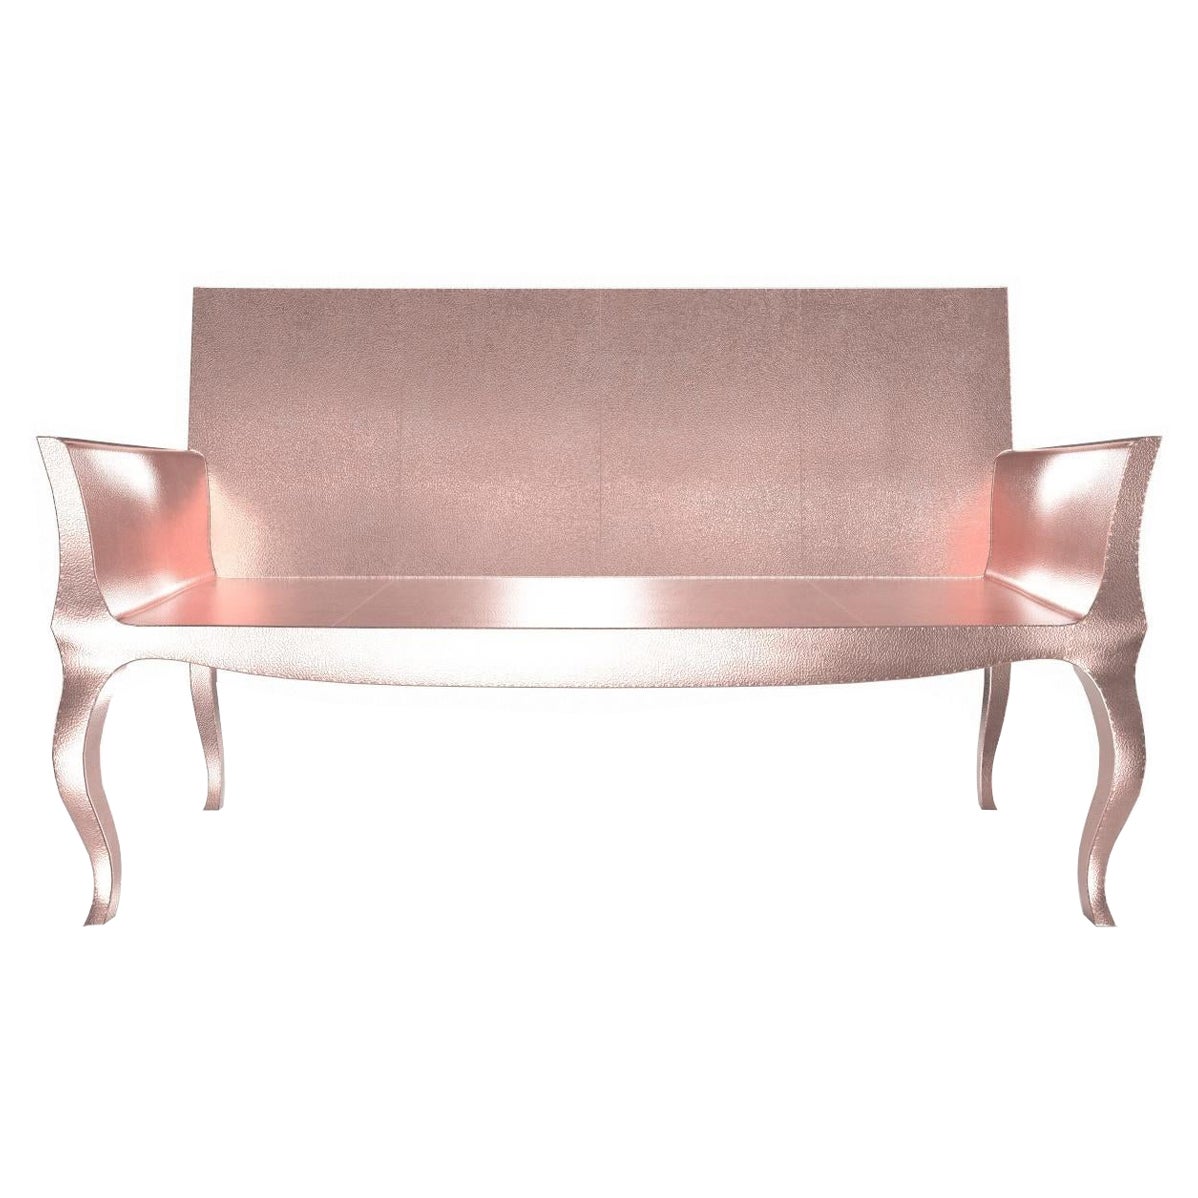 Louise Settee Art Deco Lounge Chairs in Fine Hammered Copper by Paul Mathieu For Sale